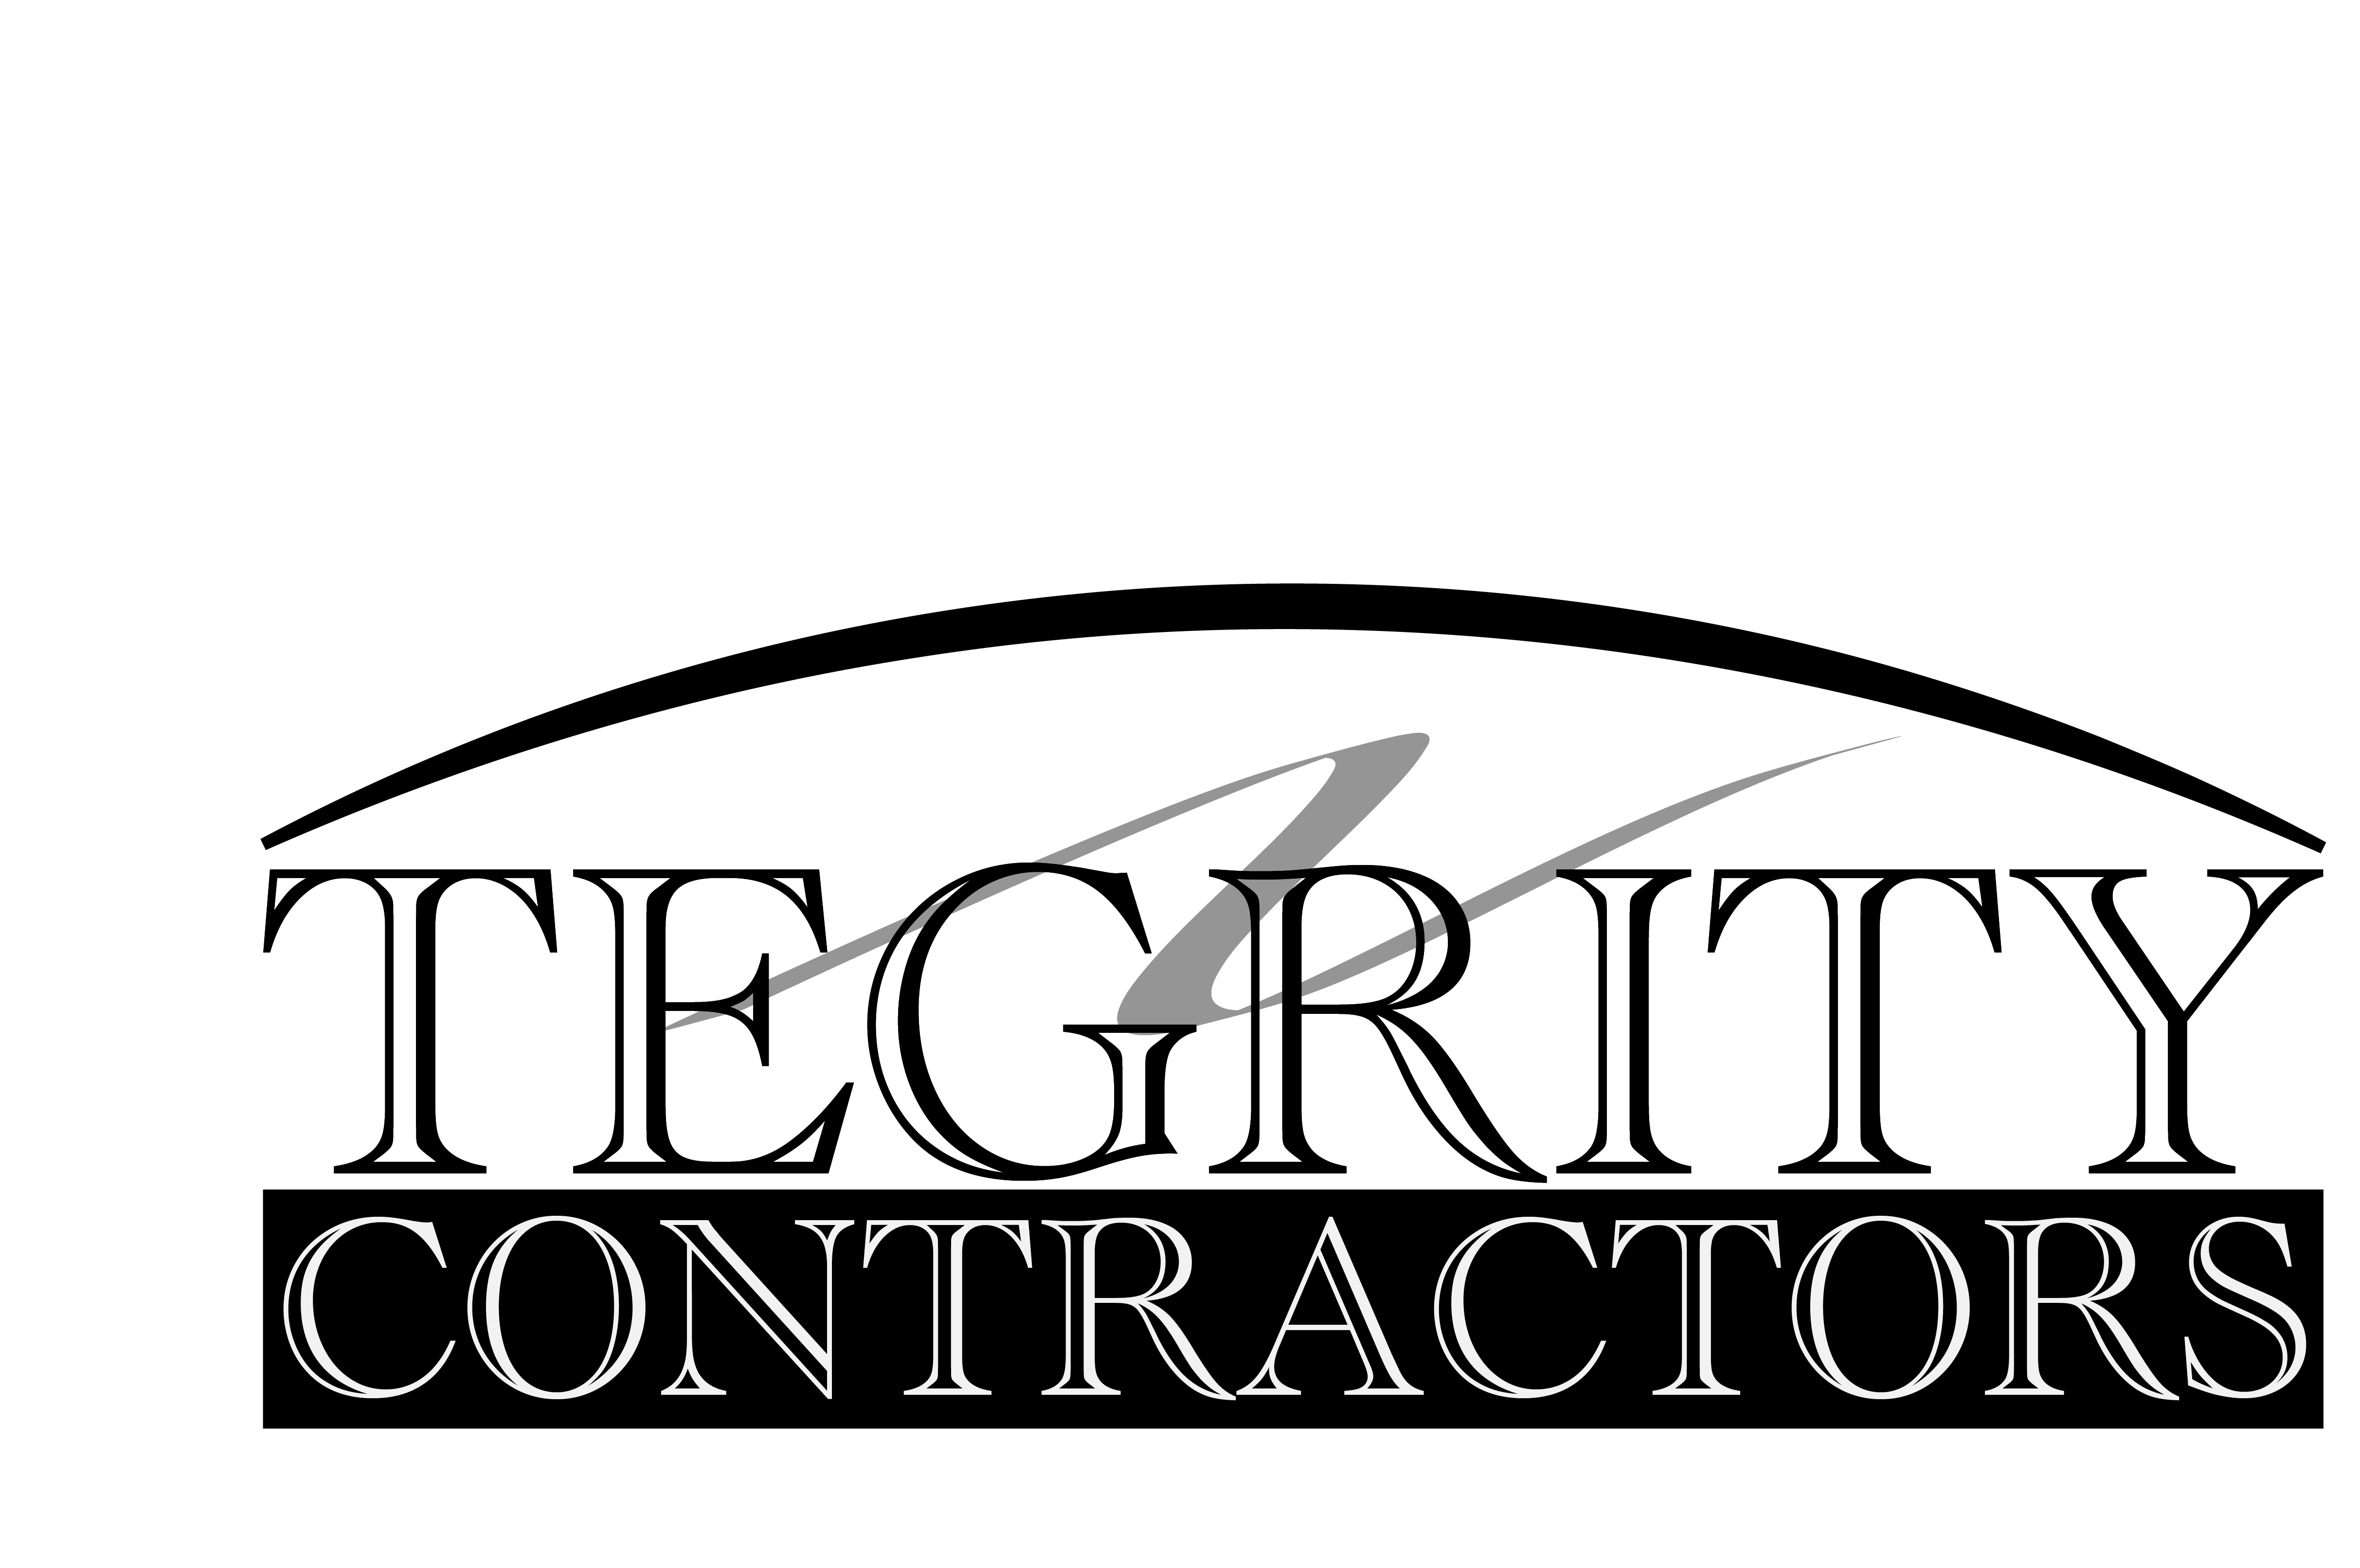 Tegrity Contractors - Full-Service Construction